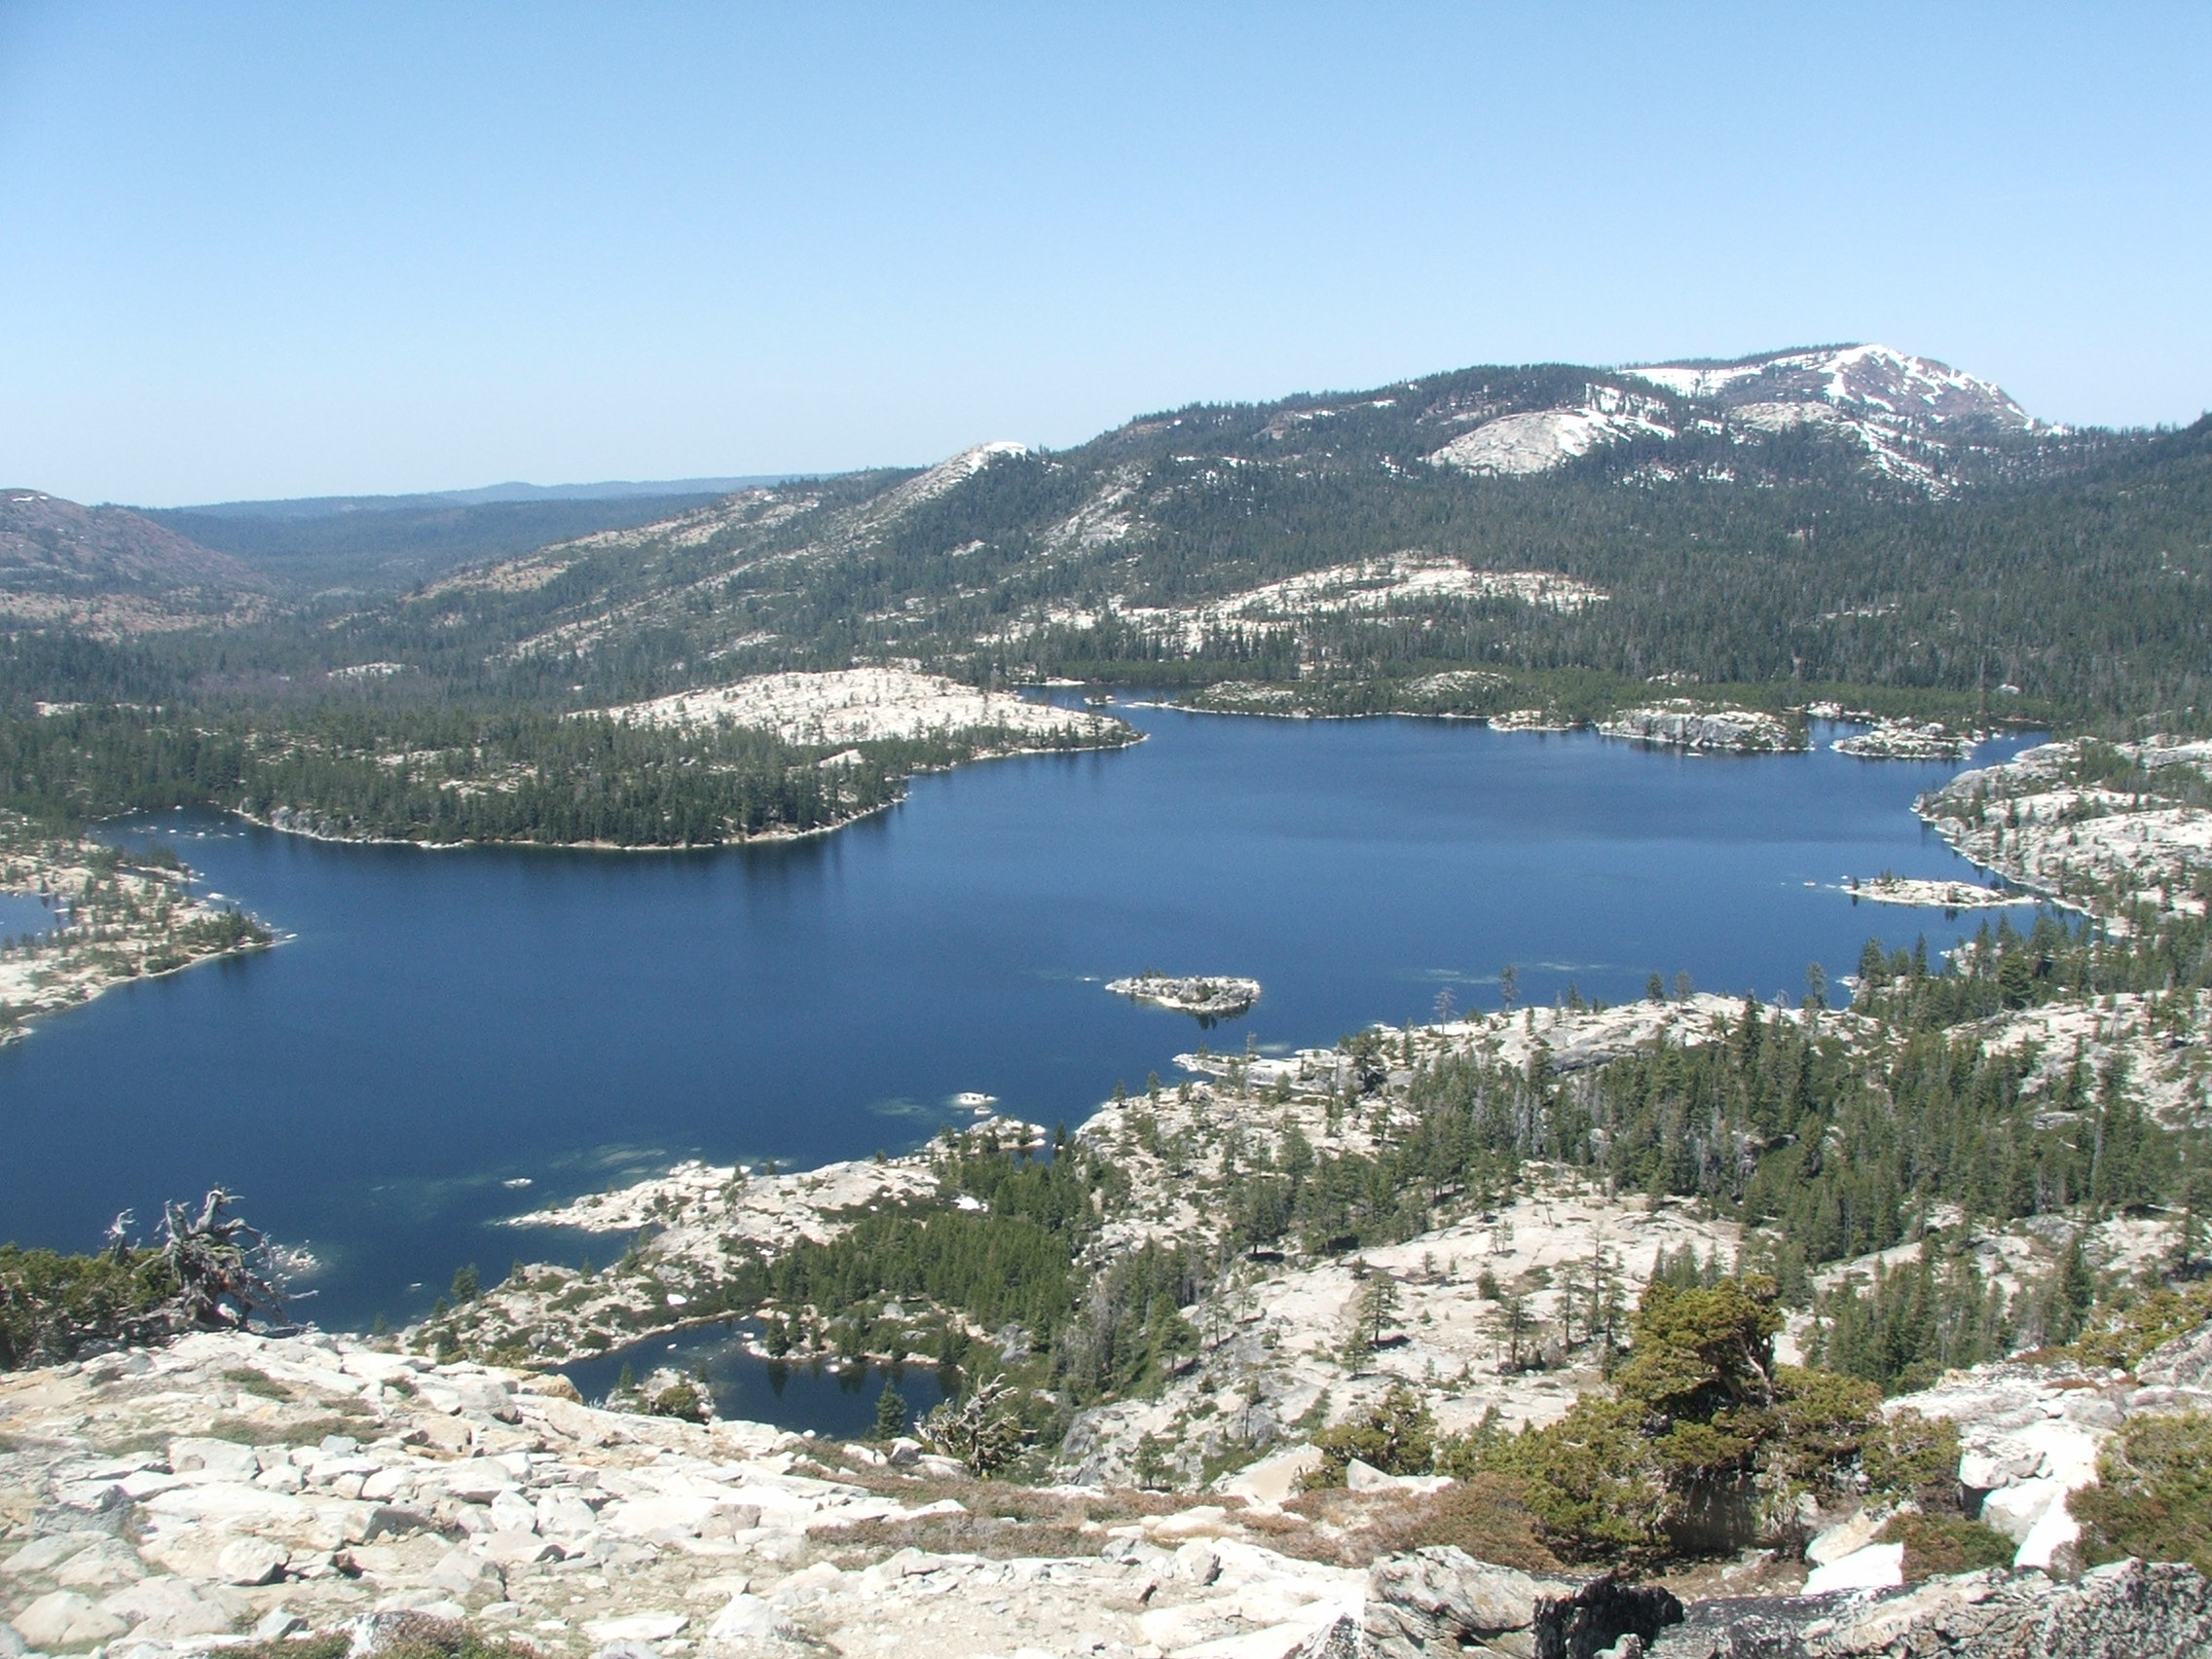 Loon Lake from above